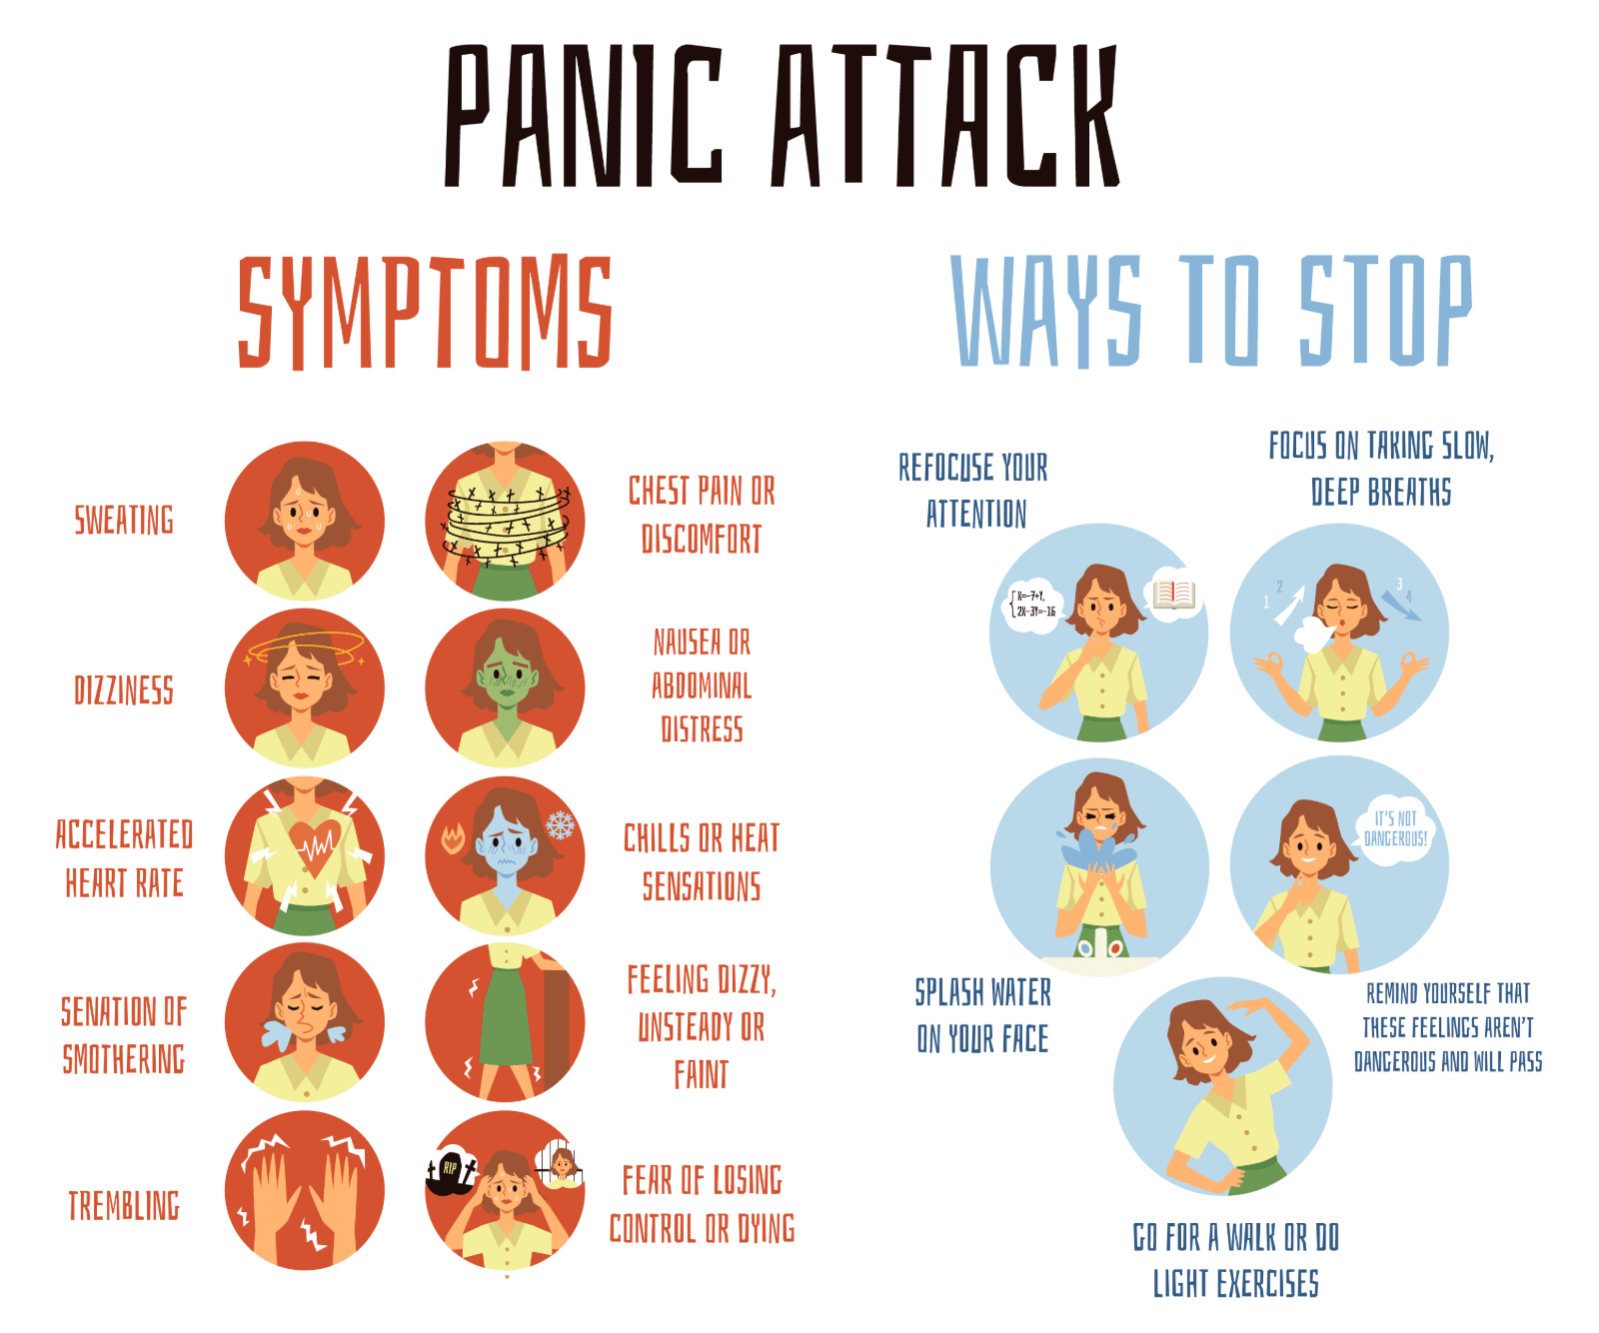 symptoms and tips for panic attack